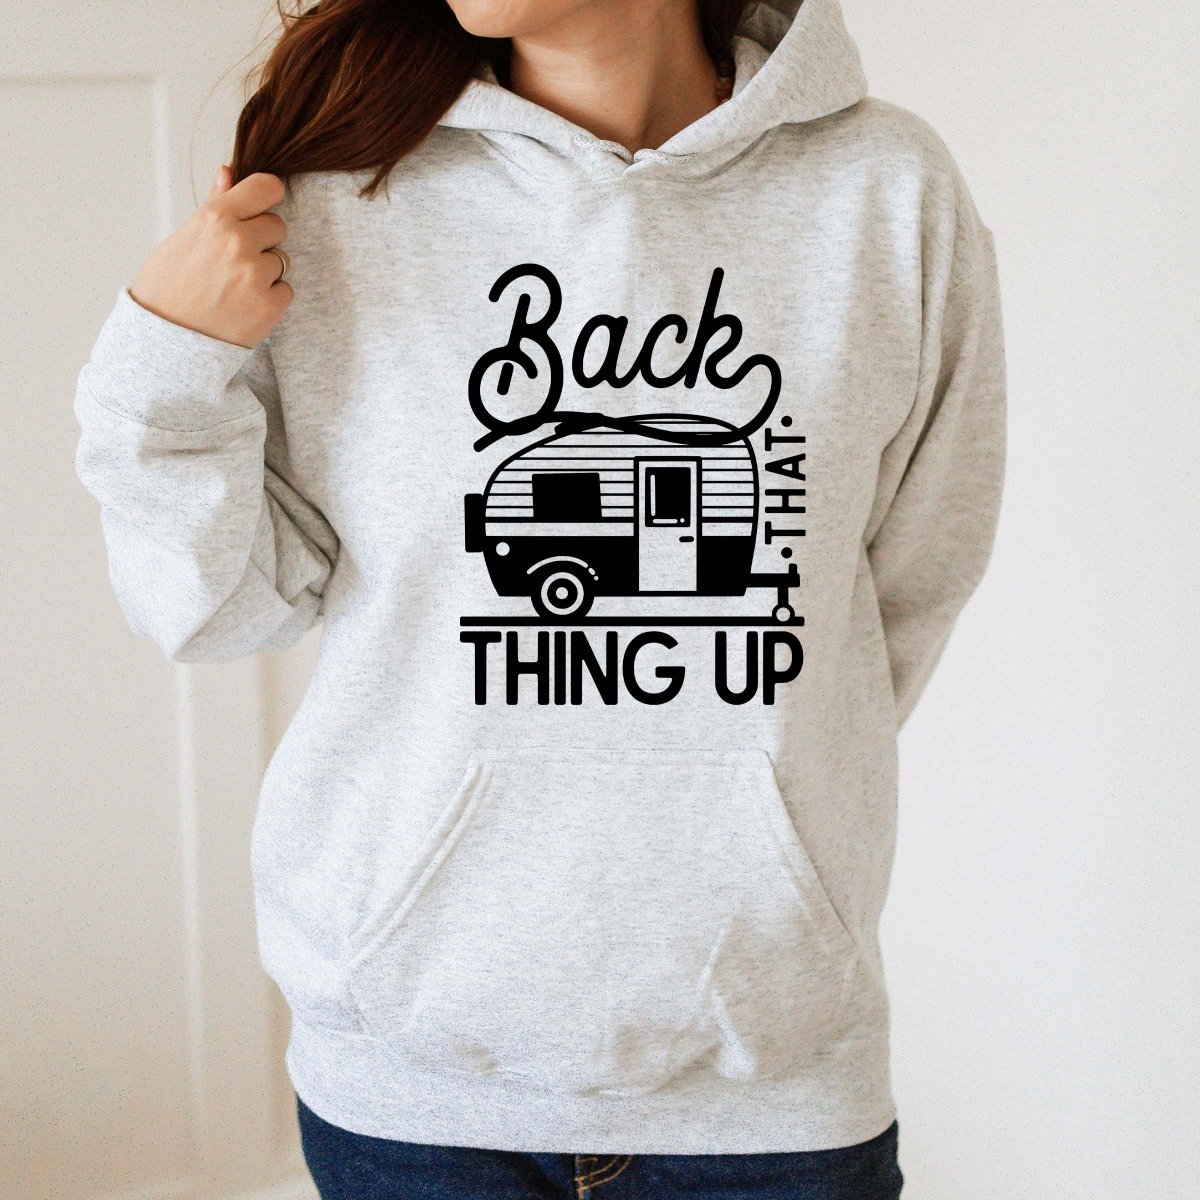 Back That Thing Up Hoodie - Limeberry Designs